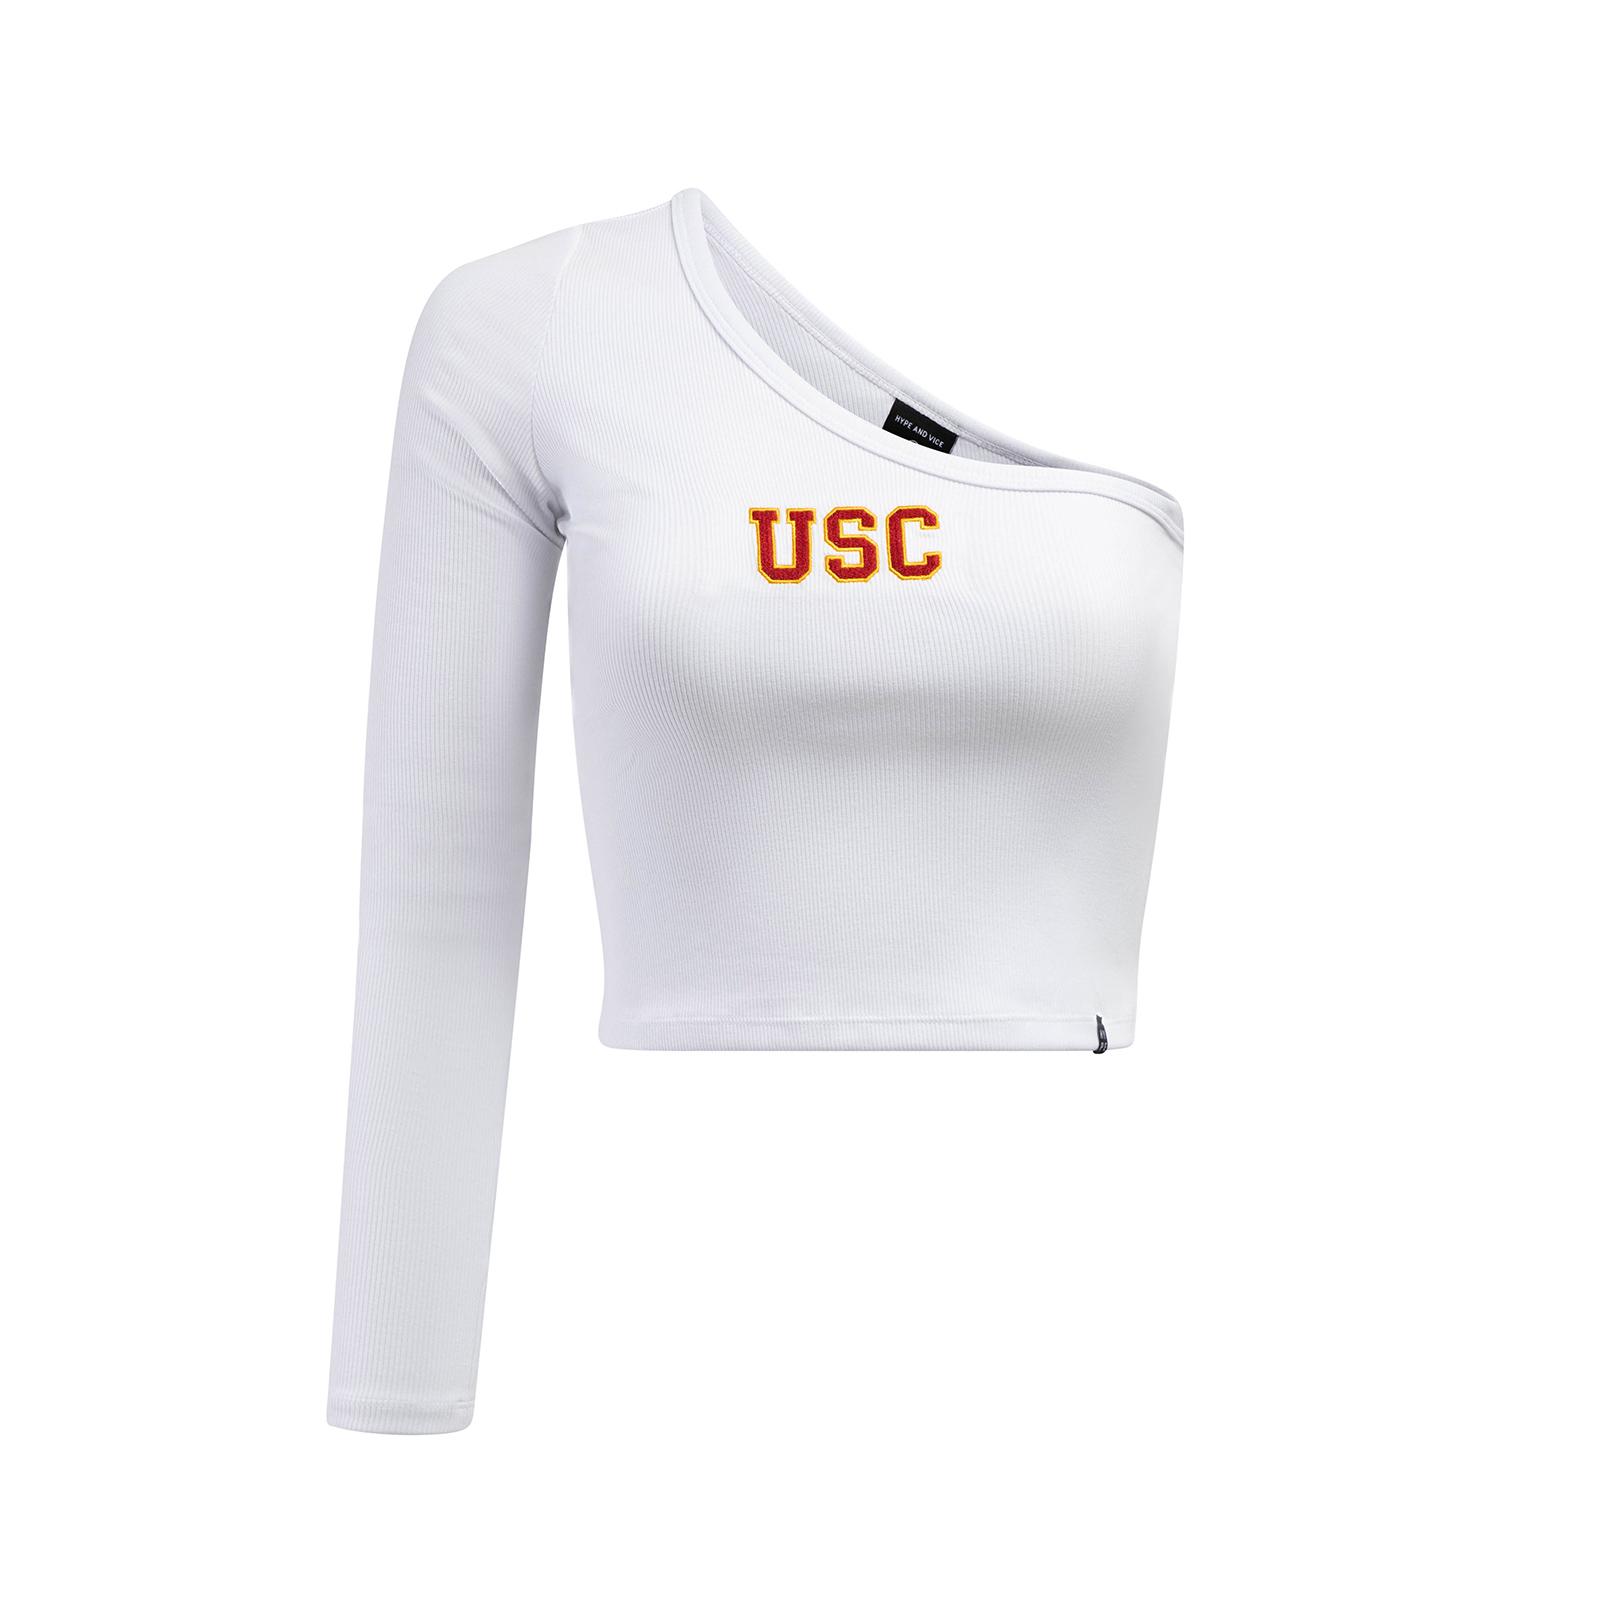 USC Womens Knock Out LS Top image01